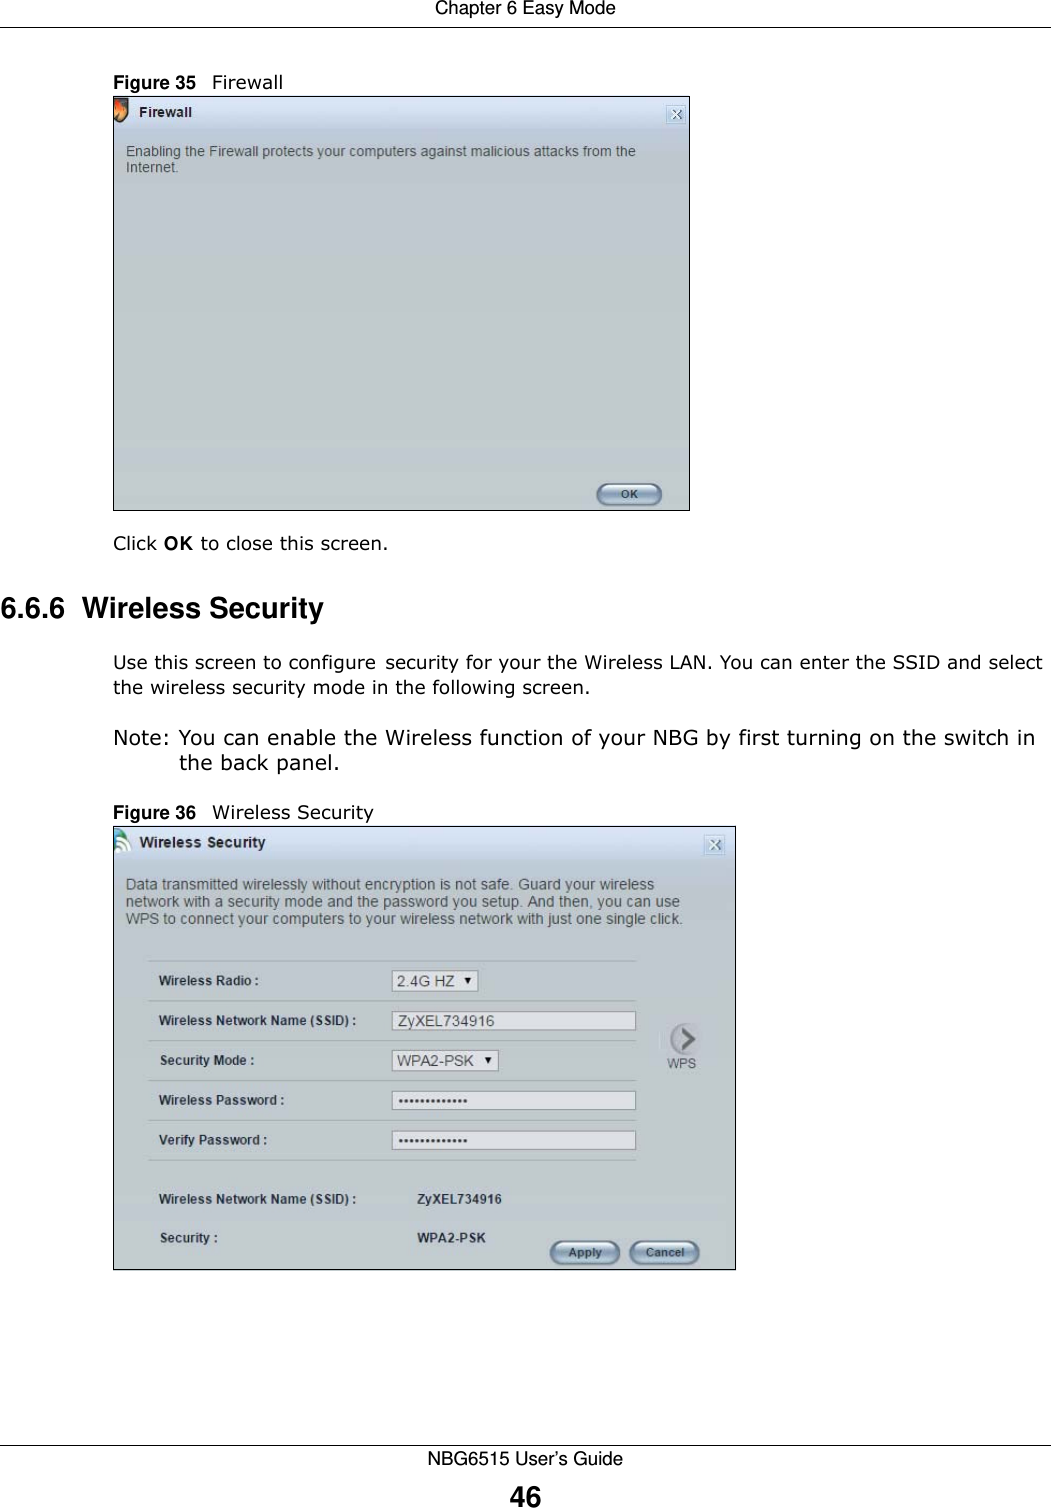 Chapter 6 Easy ModeNBG6515 User’s Guide46Figure 35   FirewallClick OK to close this screen.6.6.6  Wireless SecurityUse this screen to configure security for your the Wireless LAN. You can enter the SSID and select the wireless security mode in the following screen.Note: You can enable the Wireless function of your NBG by first turning on the switch in the back panel.Figure 36   Wireless Security